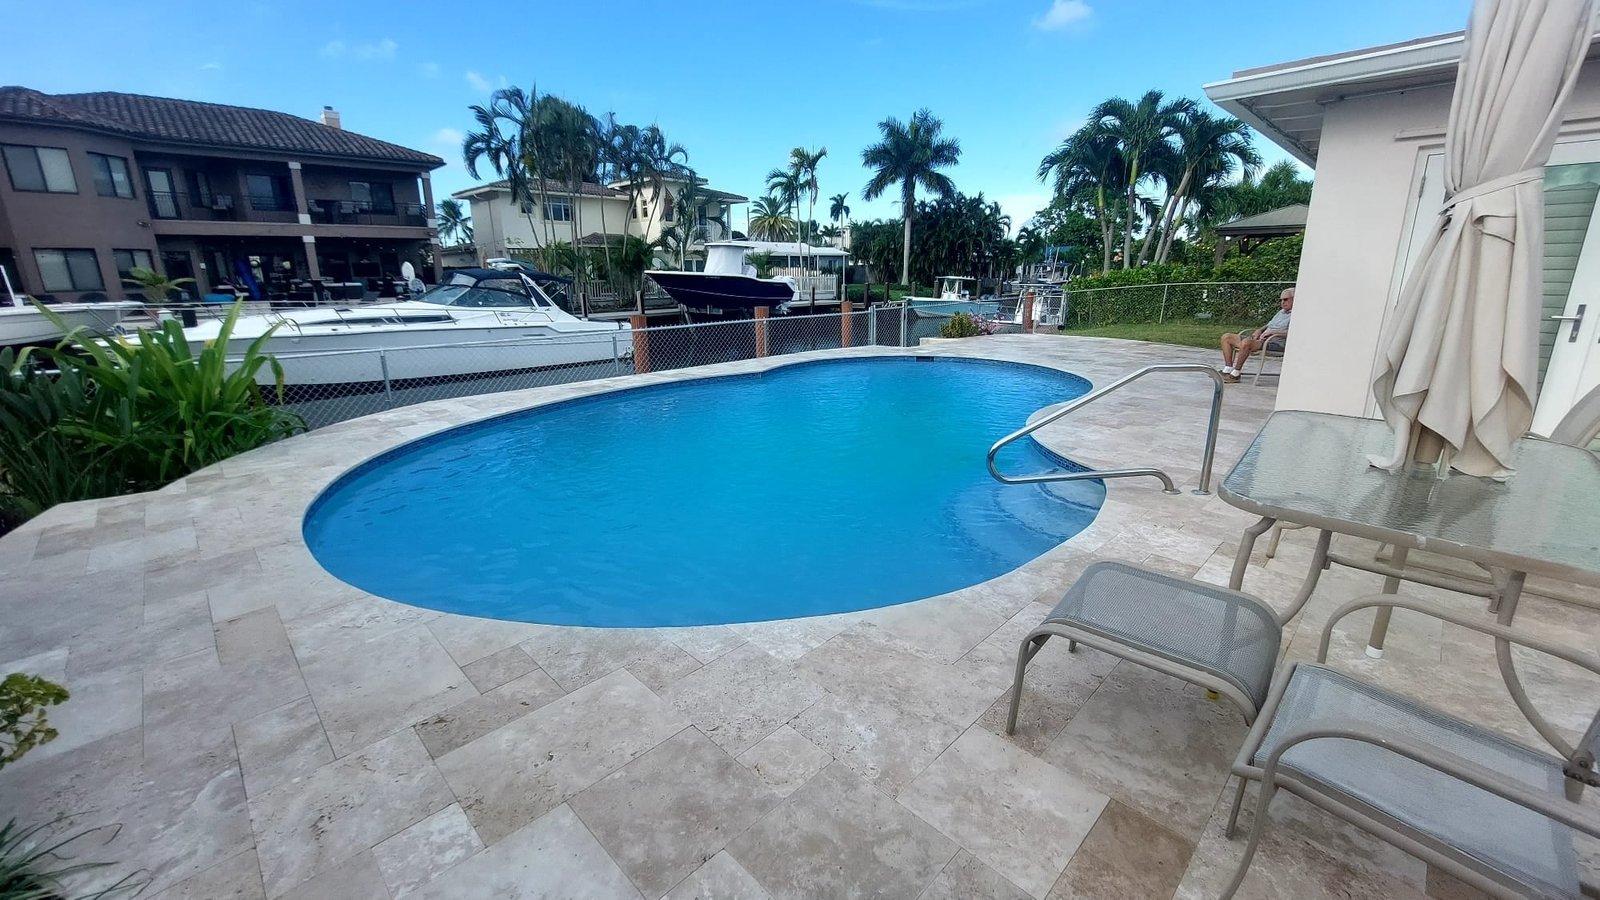 Why Choose Our Travertine Pool Pavers?